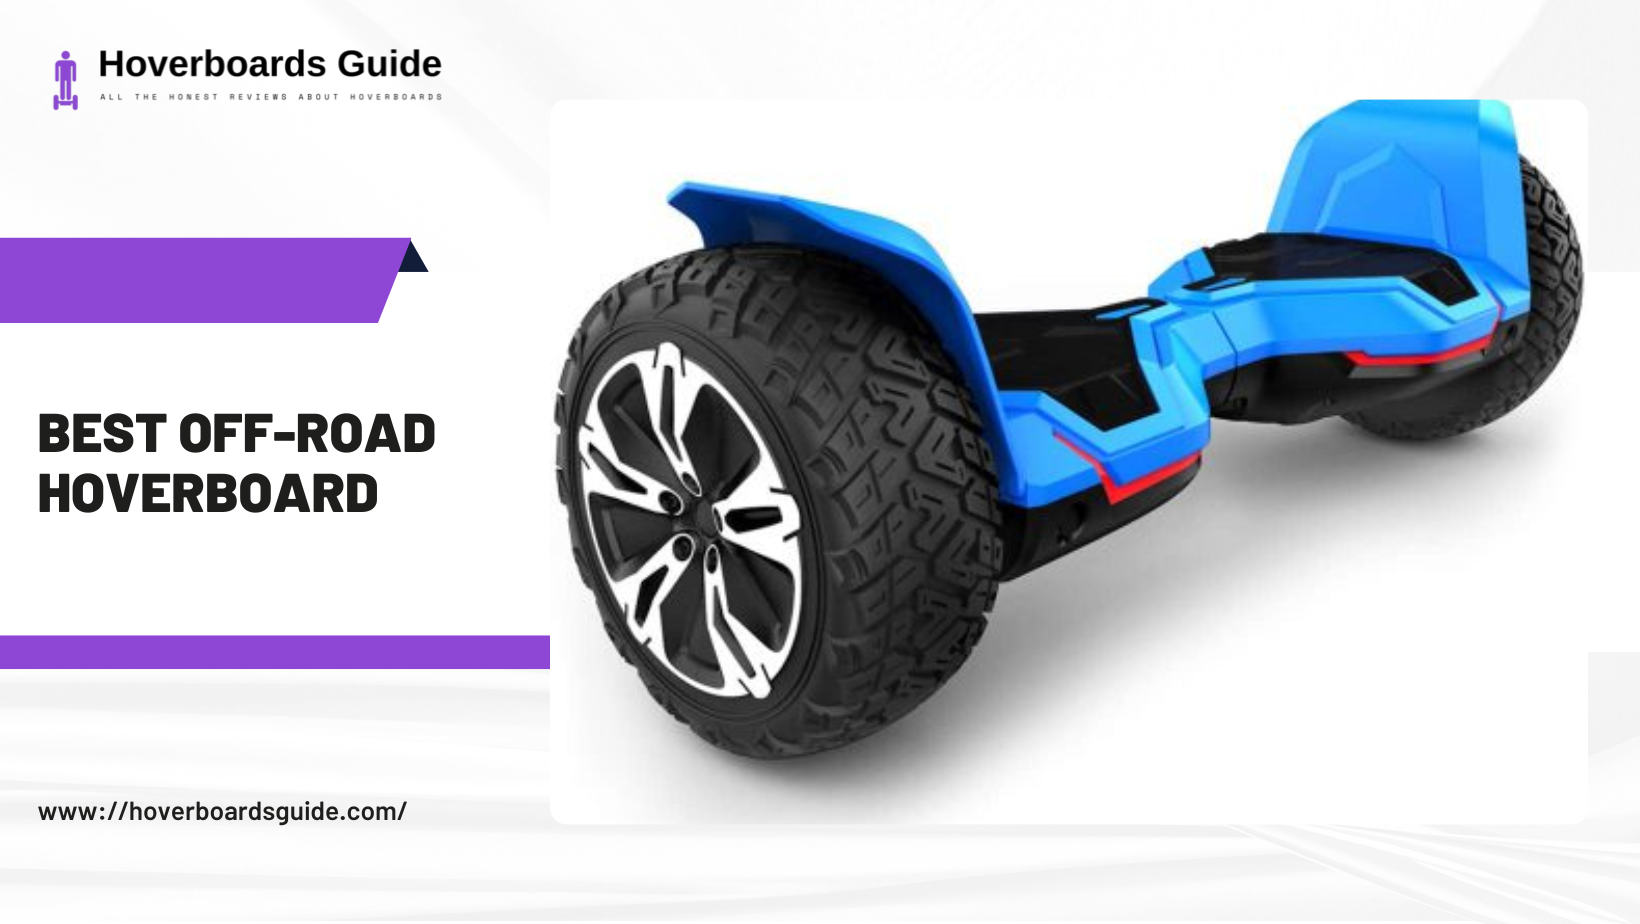 Which is the very best Hoverboard of all times